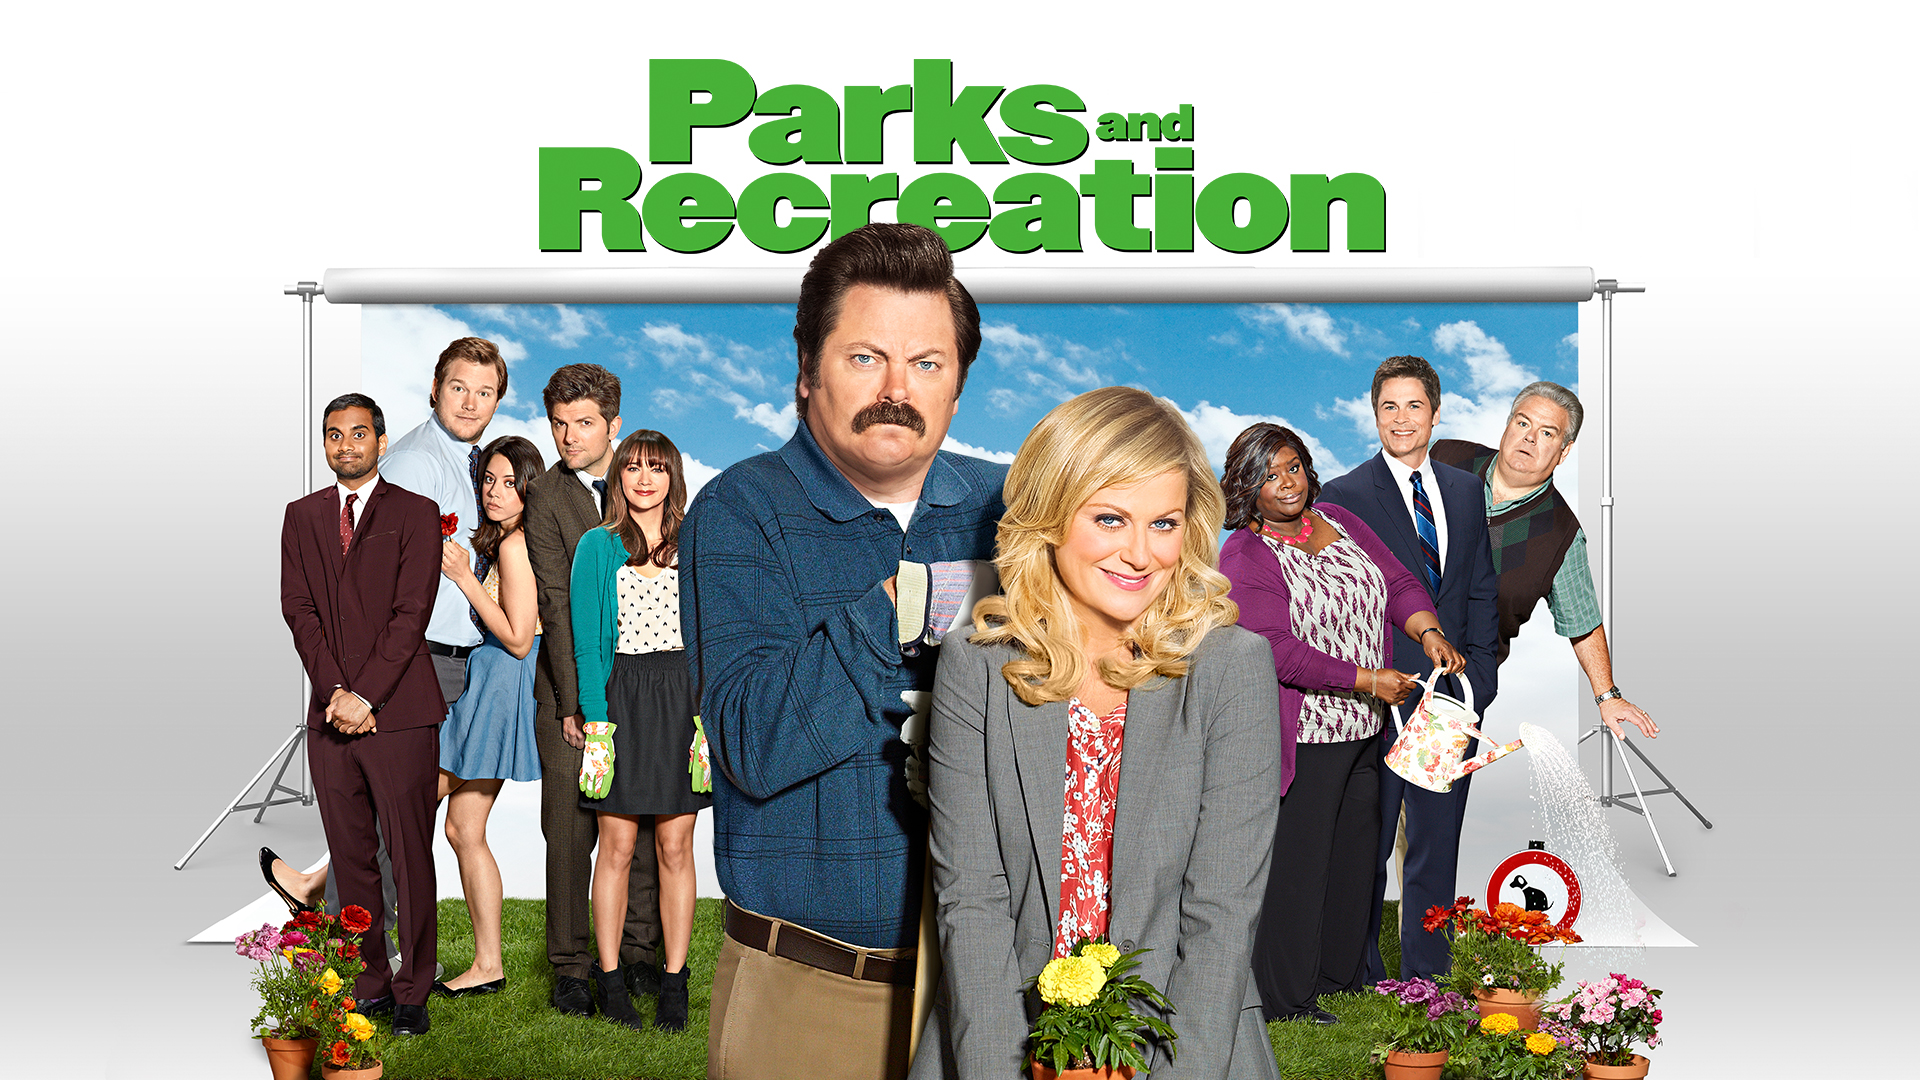 Bye bye old parks and recreation, you’re 5,000 candles in the wind